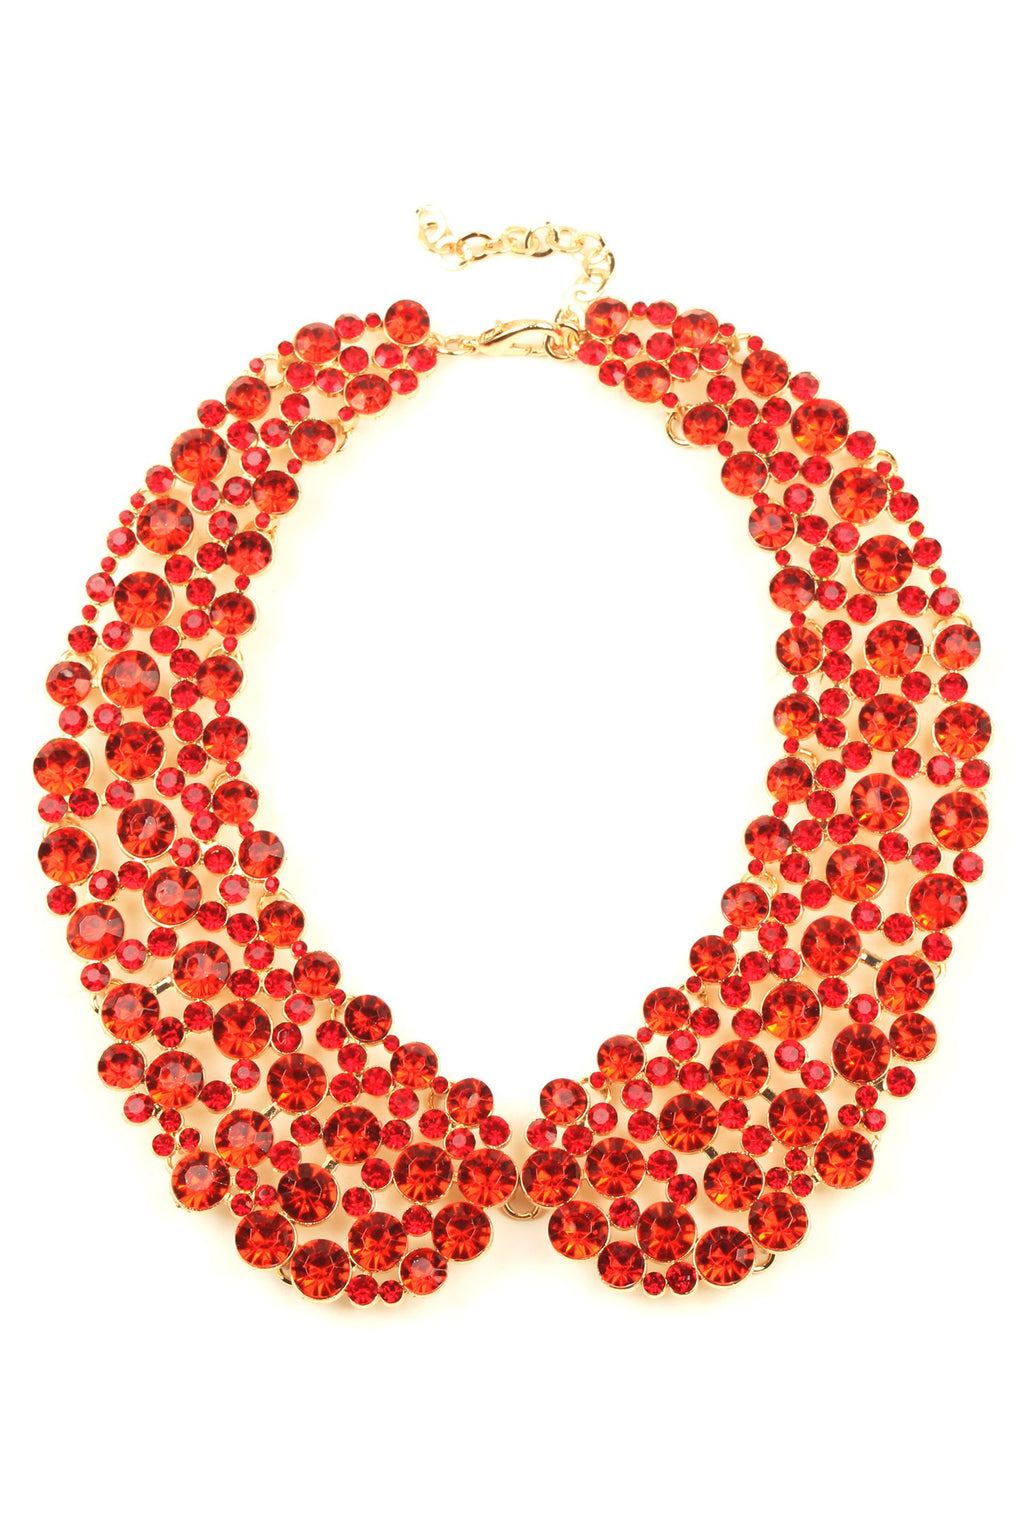 12 inch gold collar necklace with circular red crystals arranged in collar pattern.